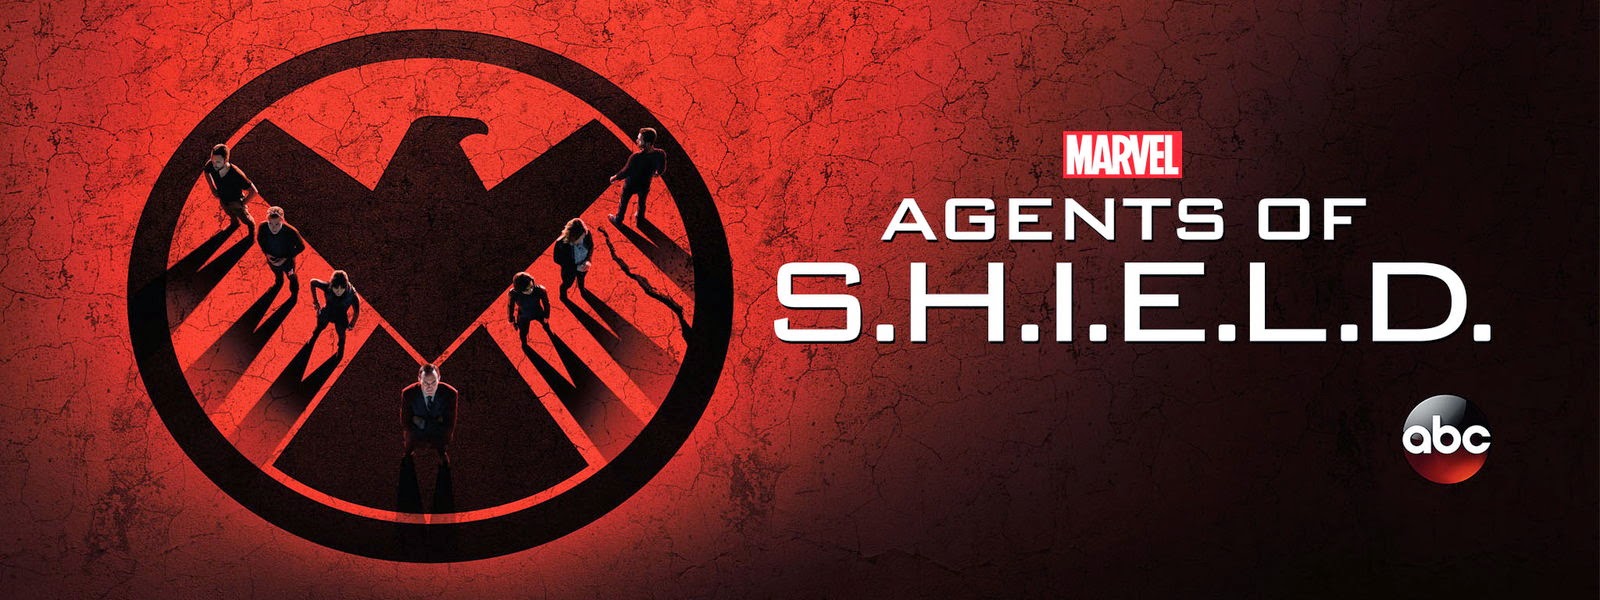 Agents of SHIELD - Episode 2.08 - The Things We Bury - Press Release